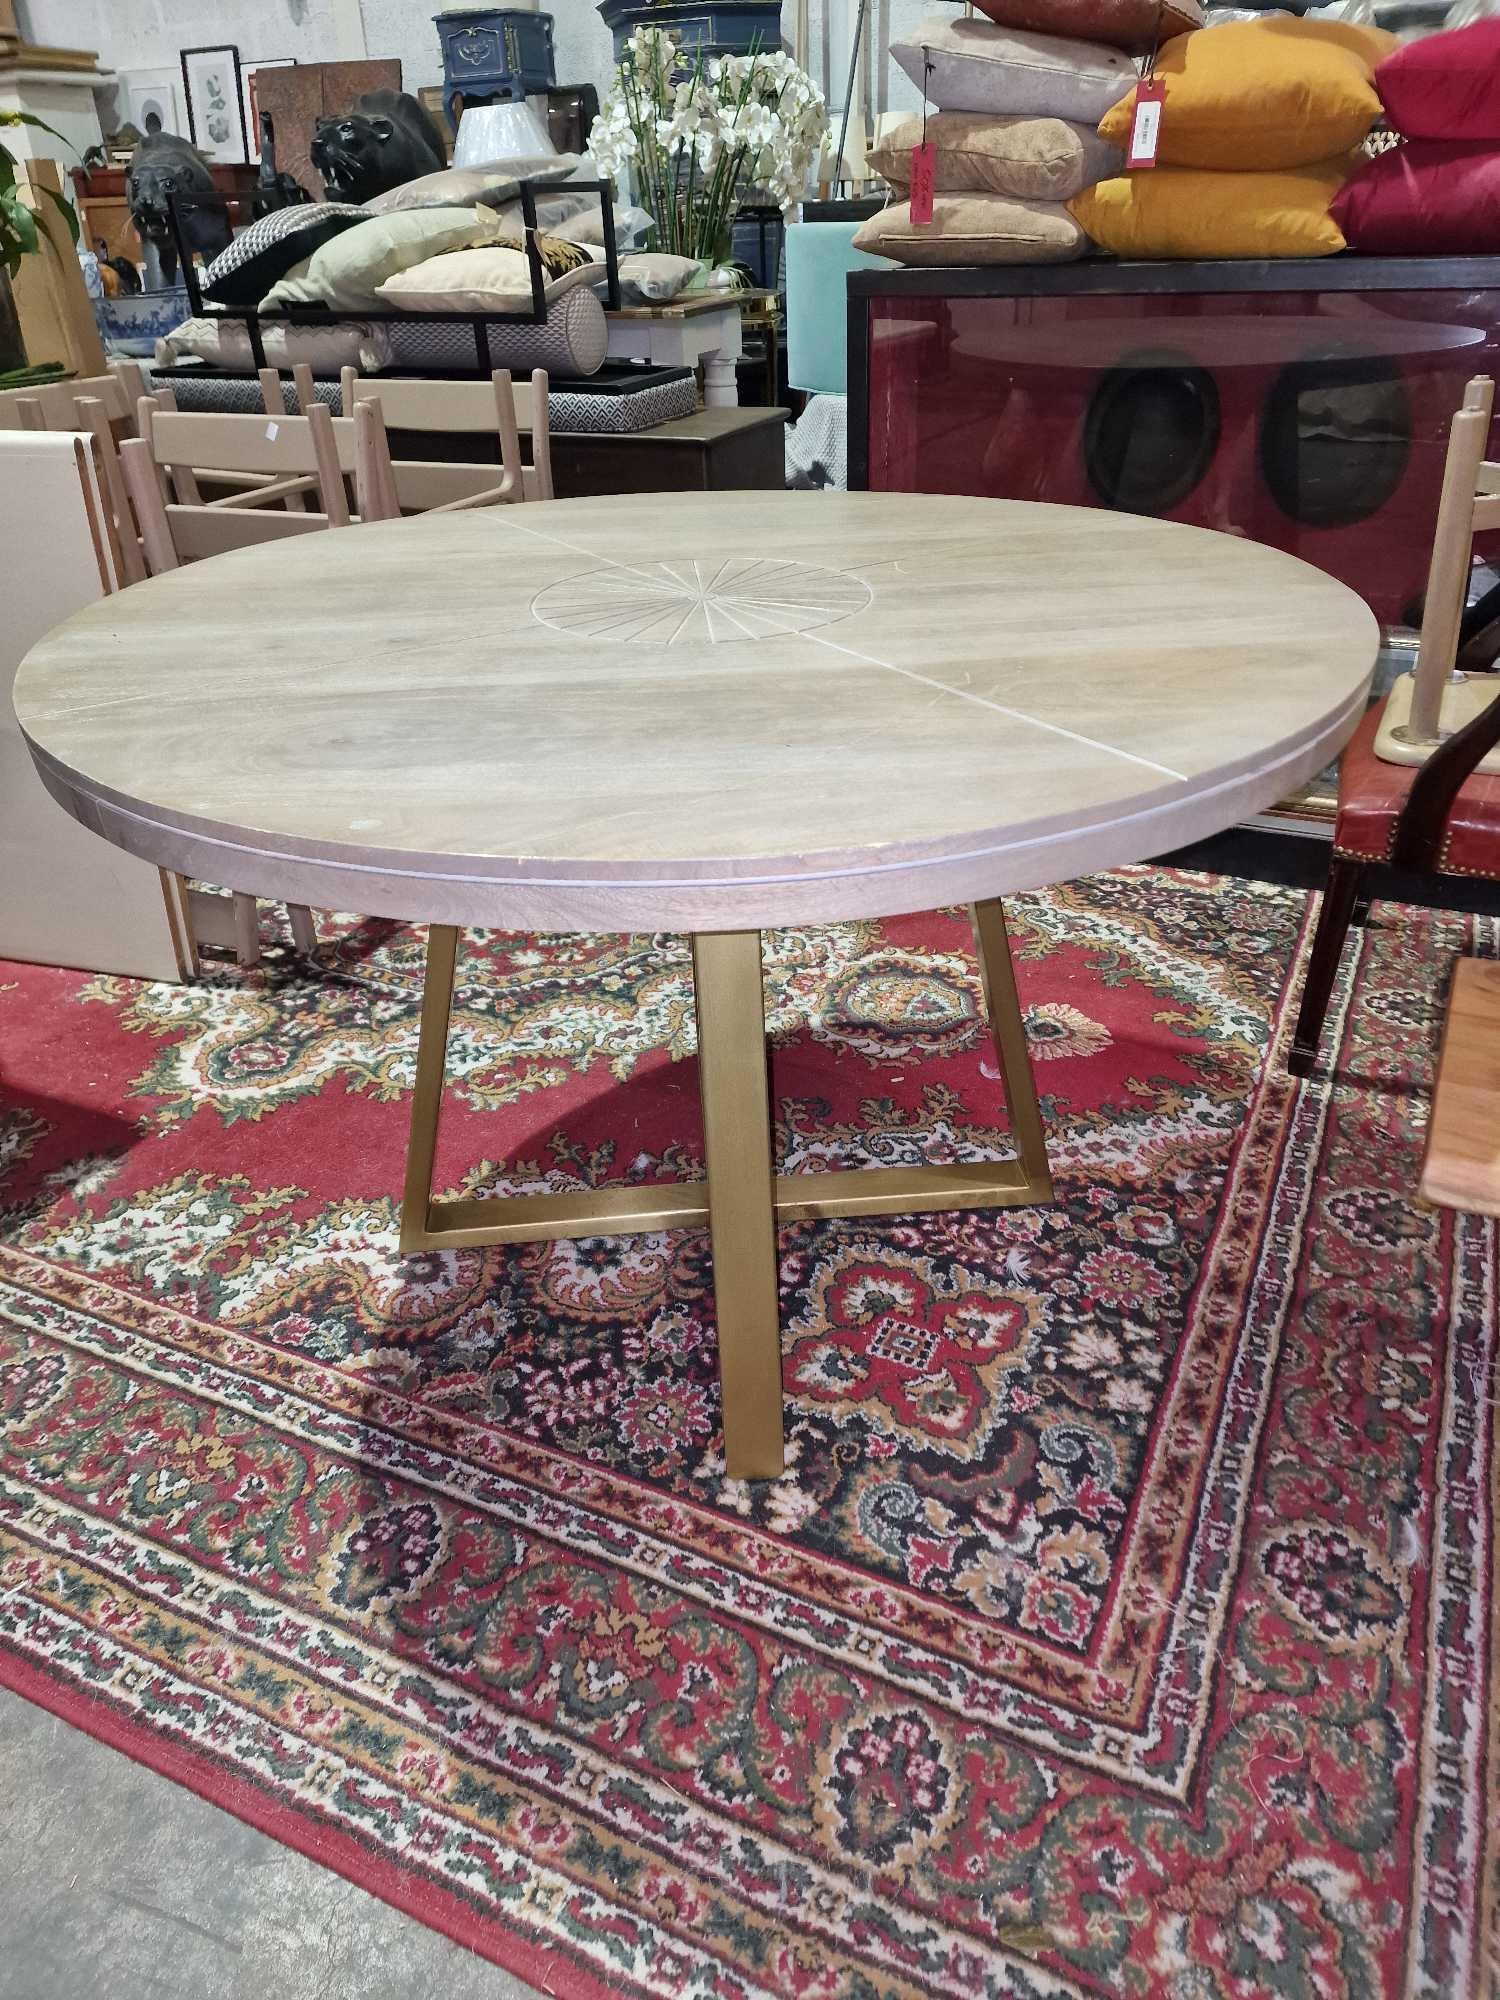 Smithson Round Dining Table Living By Christiane Lemieux The Round Dining Table Is A Scene - Image 6 of 7